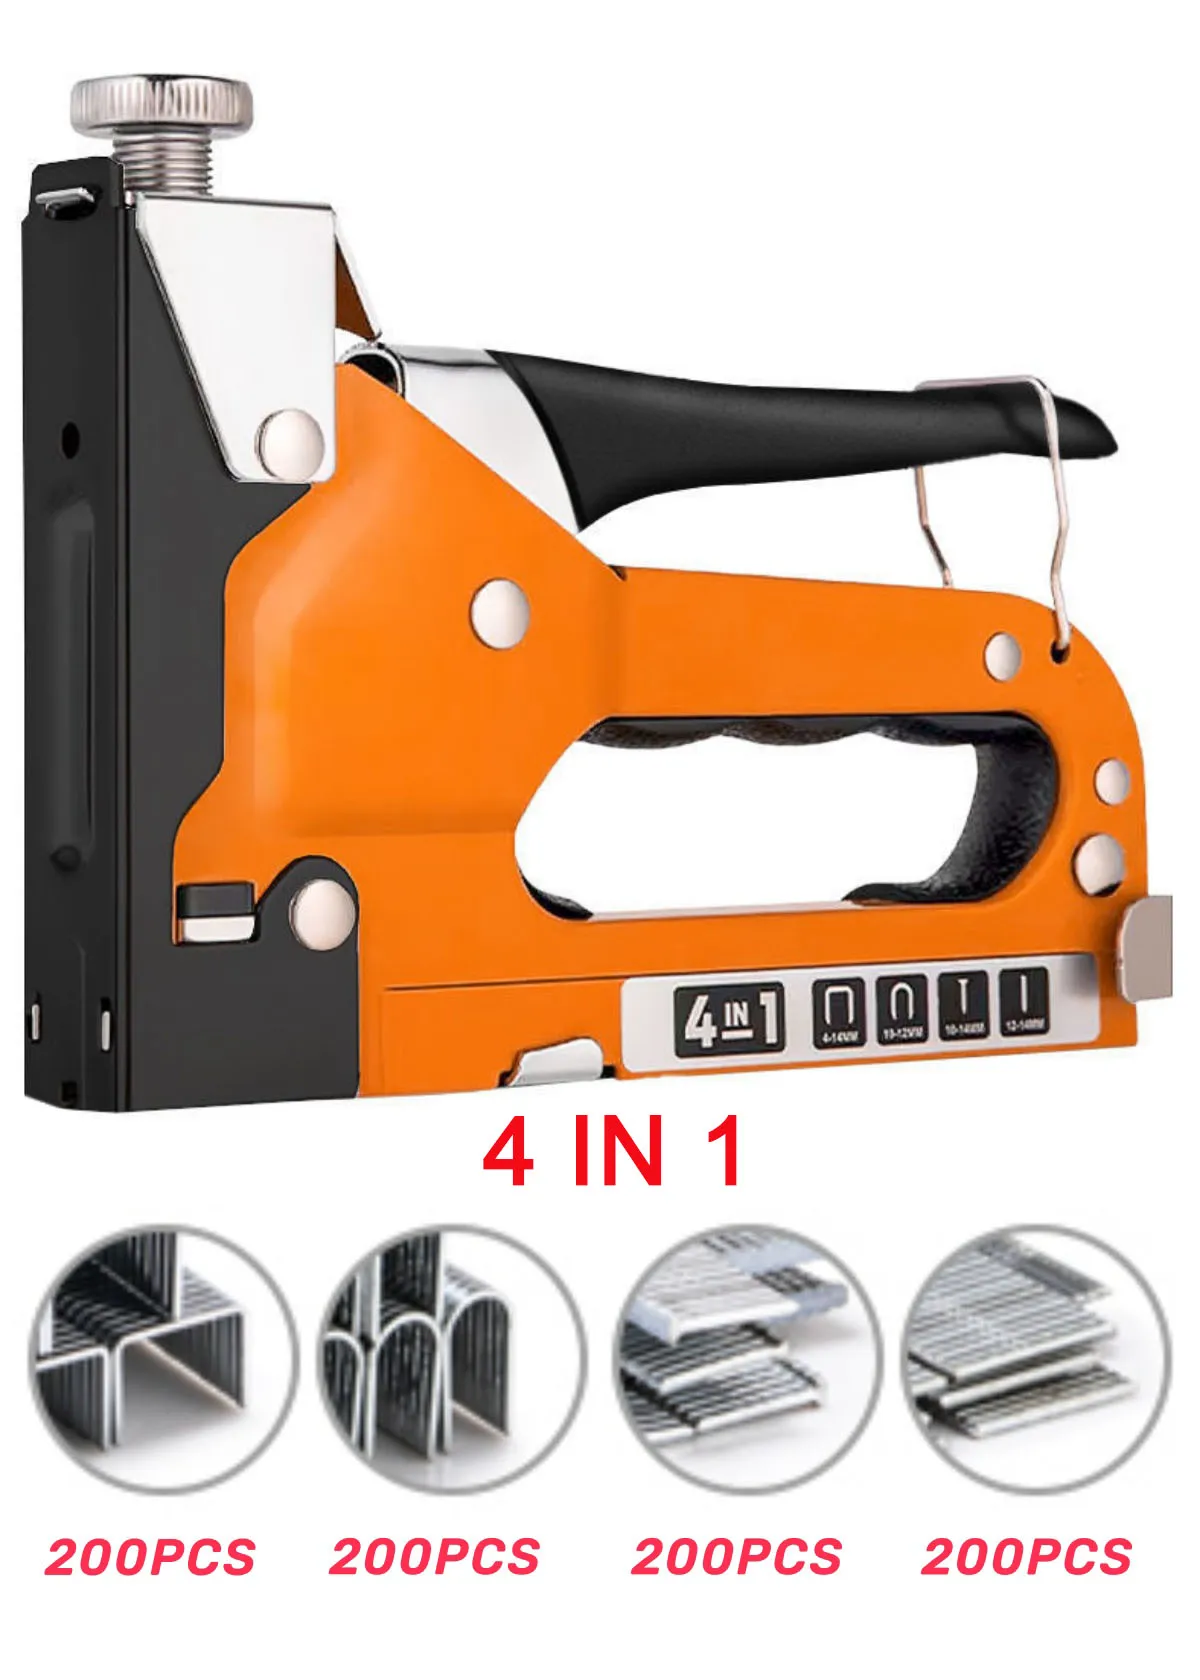 

Interior Decoration 4-in-1 Nail Gun with 800 Staples and Staple Remover for Fixing Wires Advertising Decoration Woodworkers